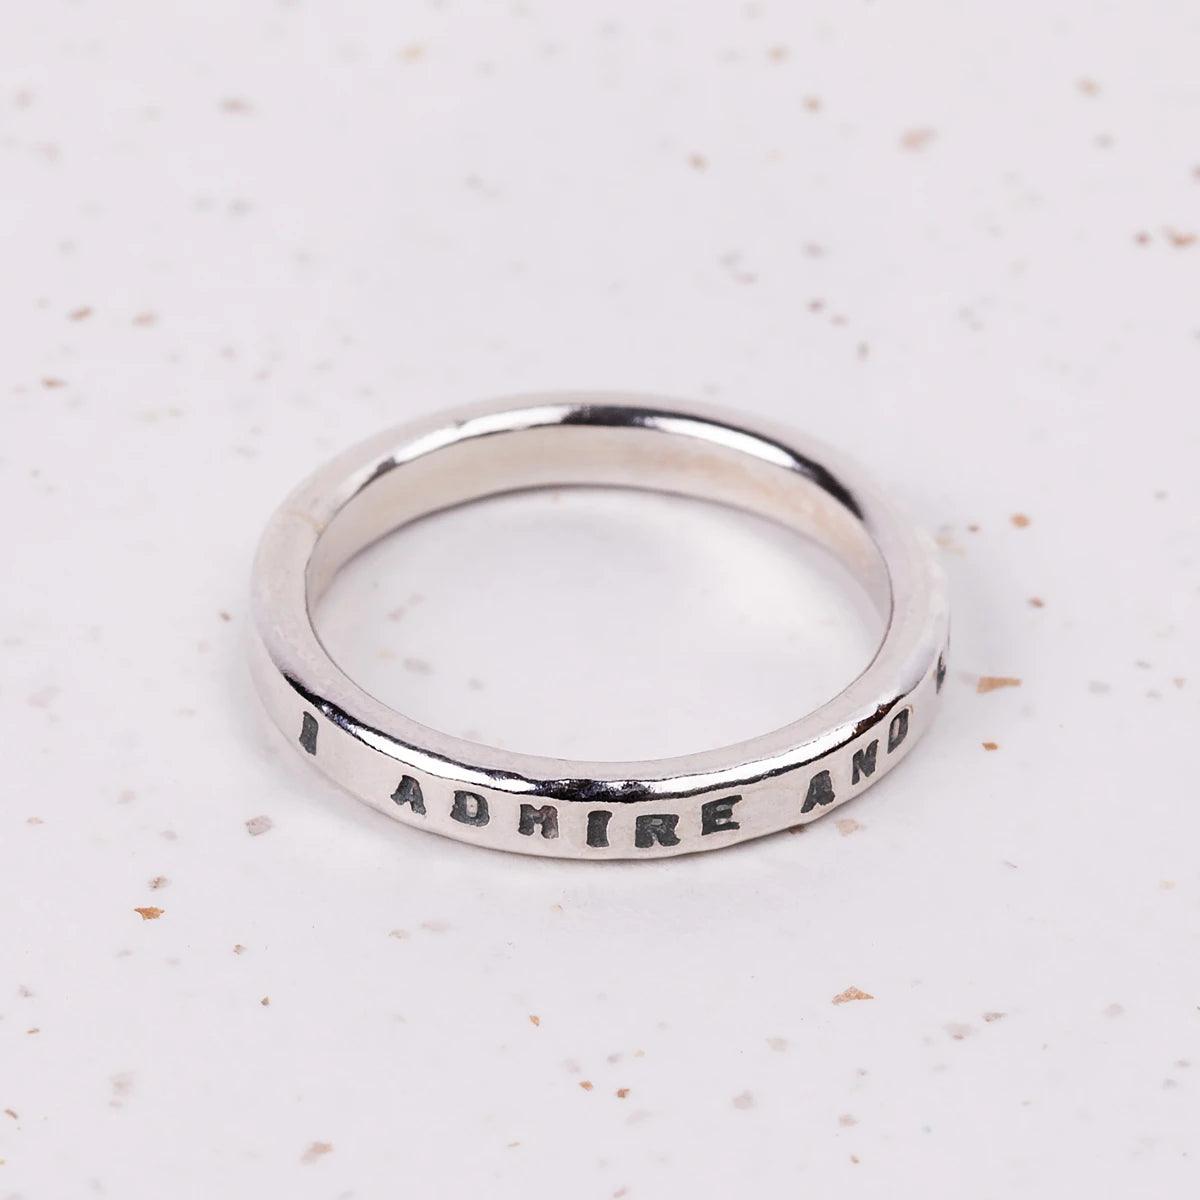 Jane Austen "I admire and love you" Quote Ring - JaneAusten.co.uk